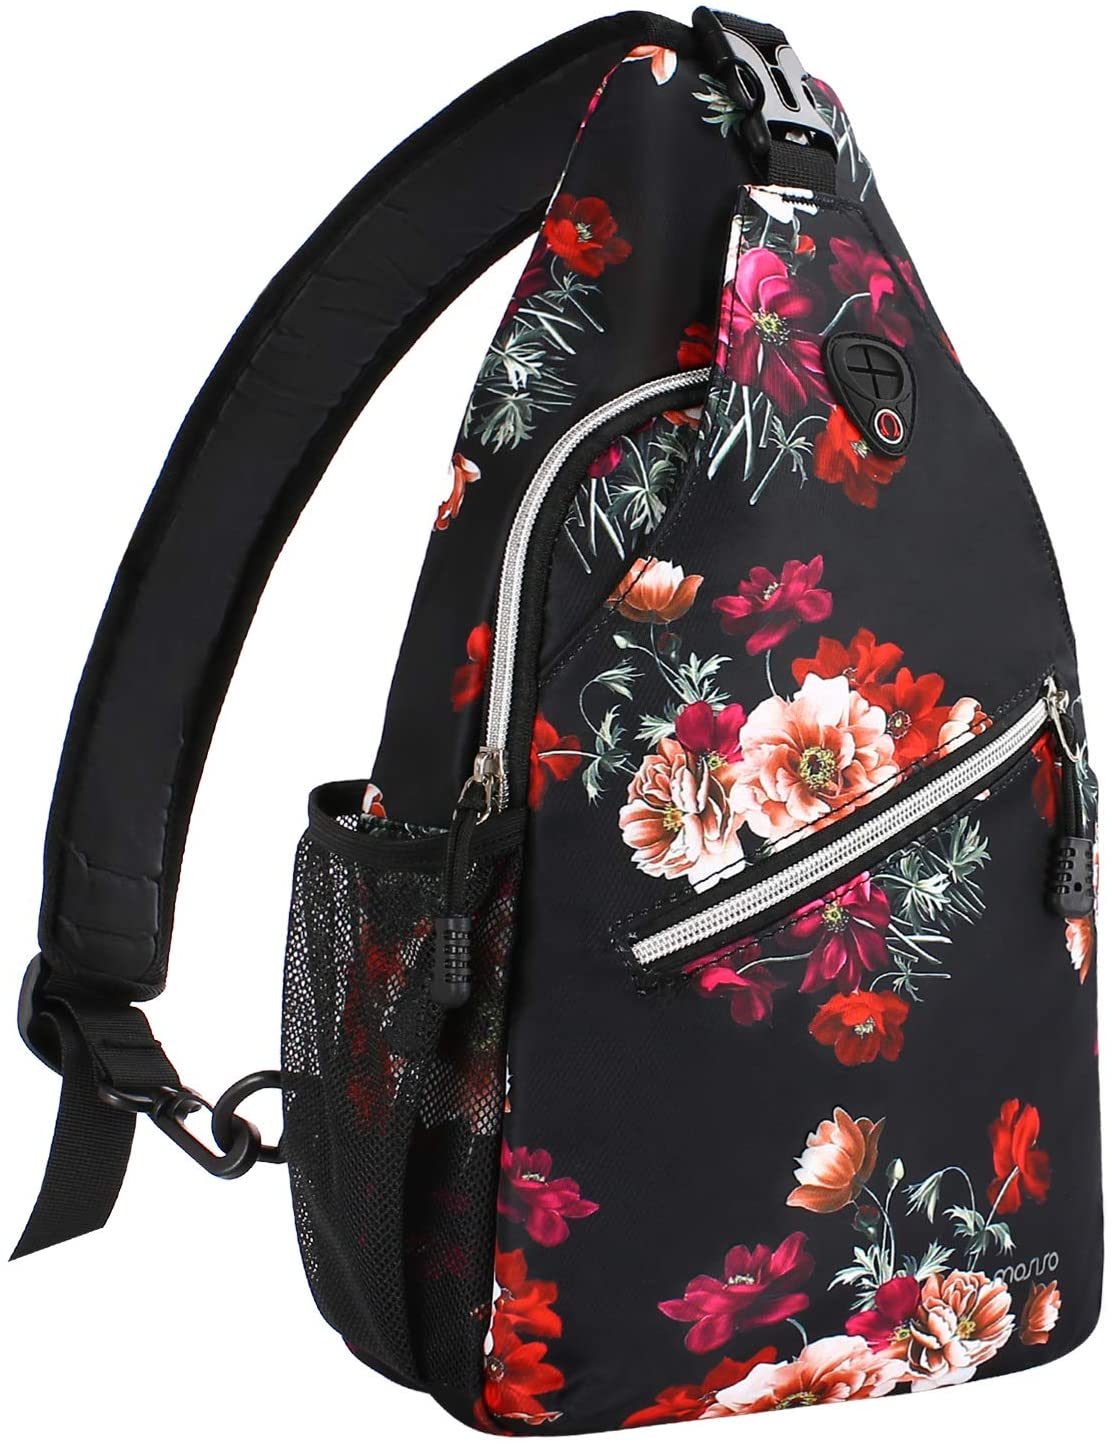 <strong>1. MOSISO Sling Backpack</strong>